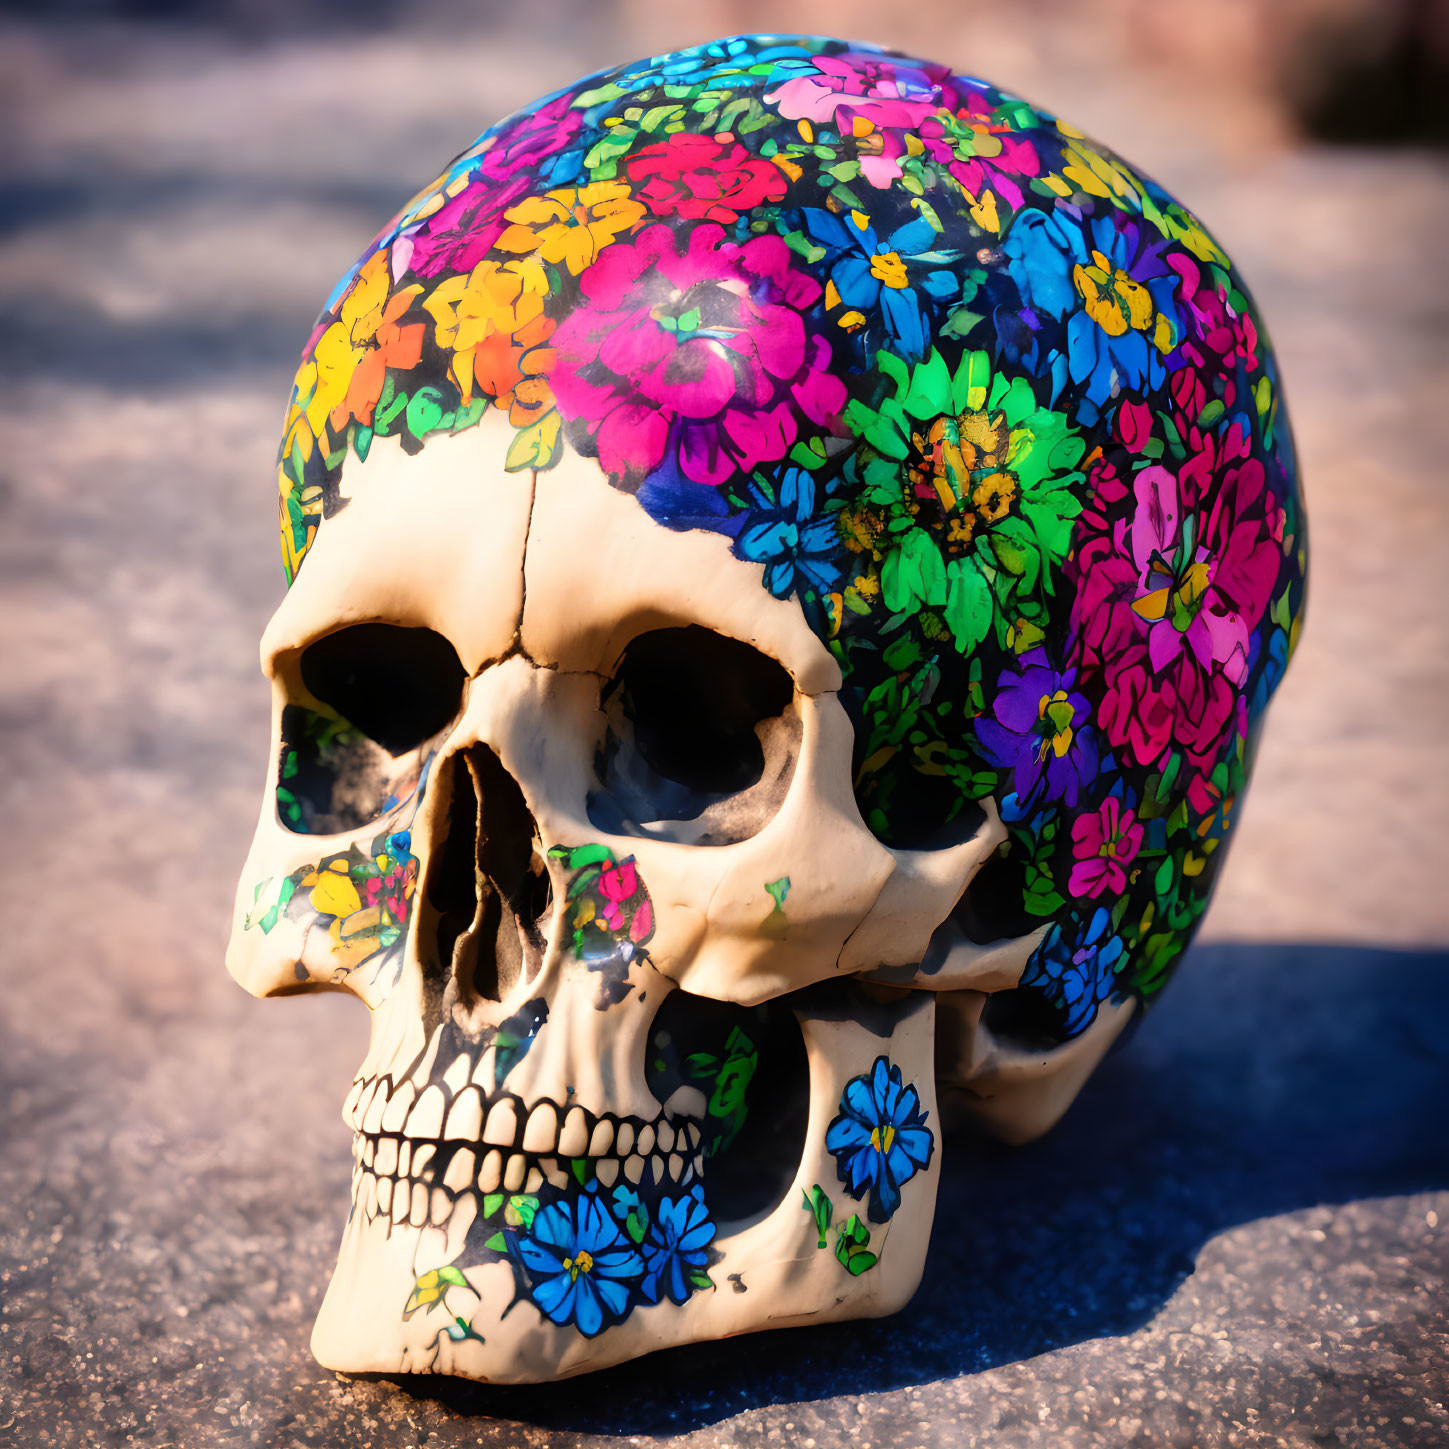 Floral-patterned colorful skull decoration in pink, blue, and green